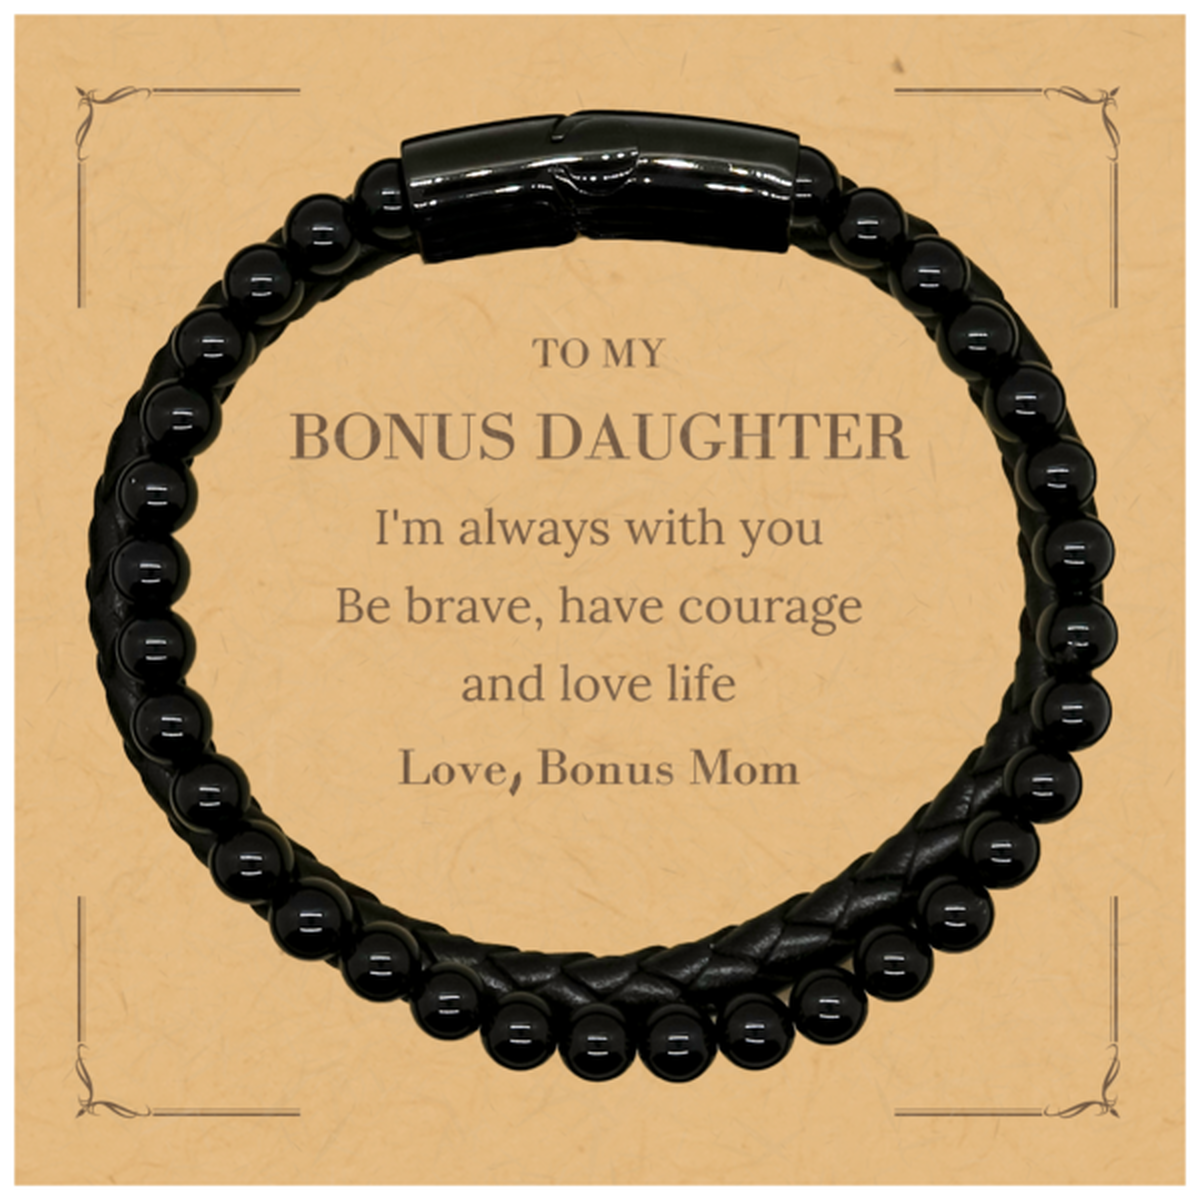 To My Bonus Daughter Gifts from Bonus Mom, Unique Stone Leather Bracelets Inspirational Christmas Birthday Graduation Gifts for Bonus Daughter I'm always with you. Be brave, have courage and love life. Love, Bonus Mom